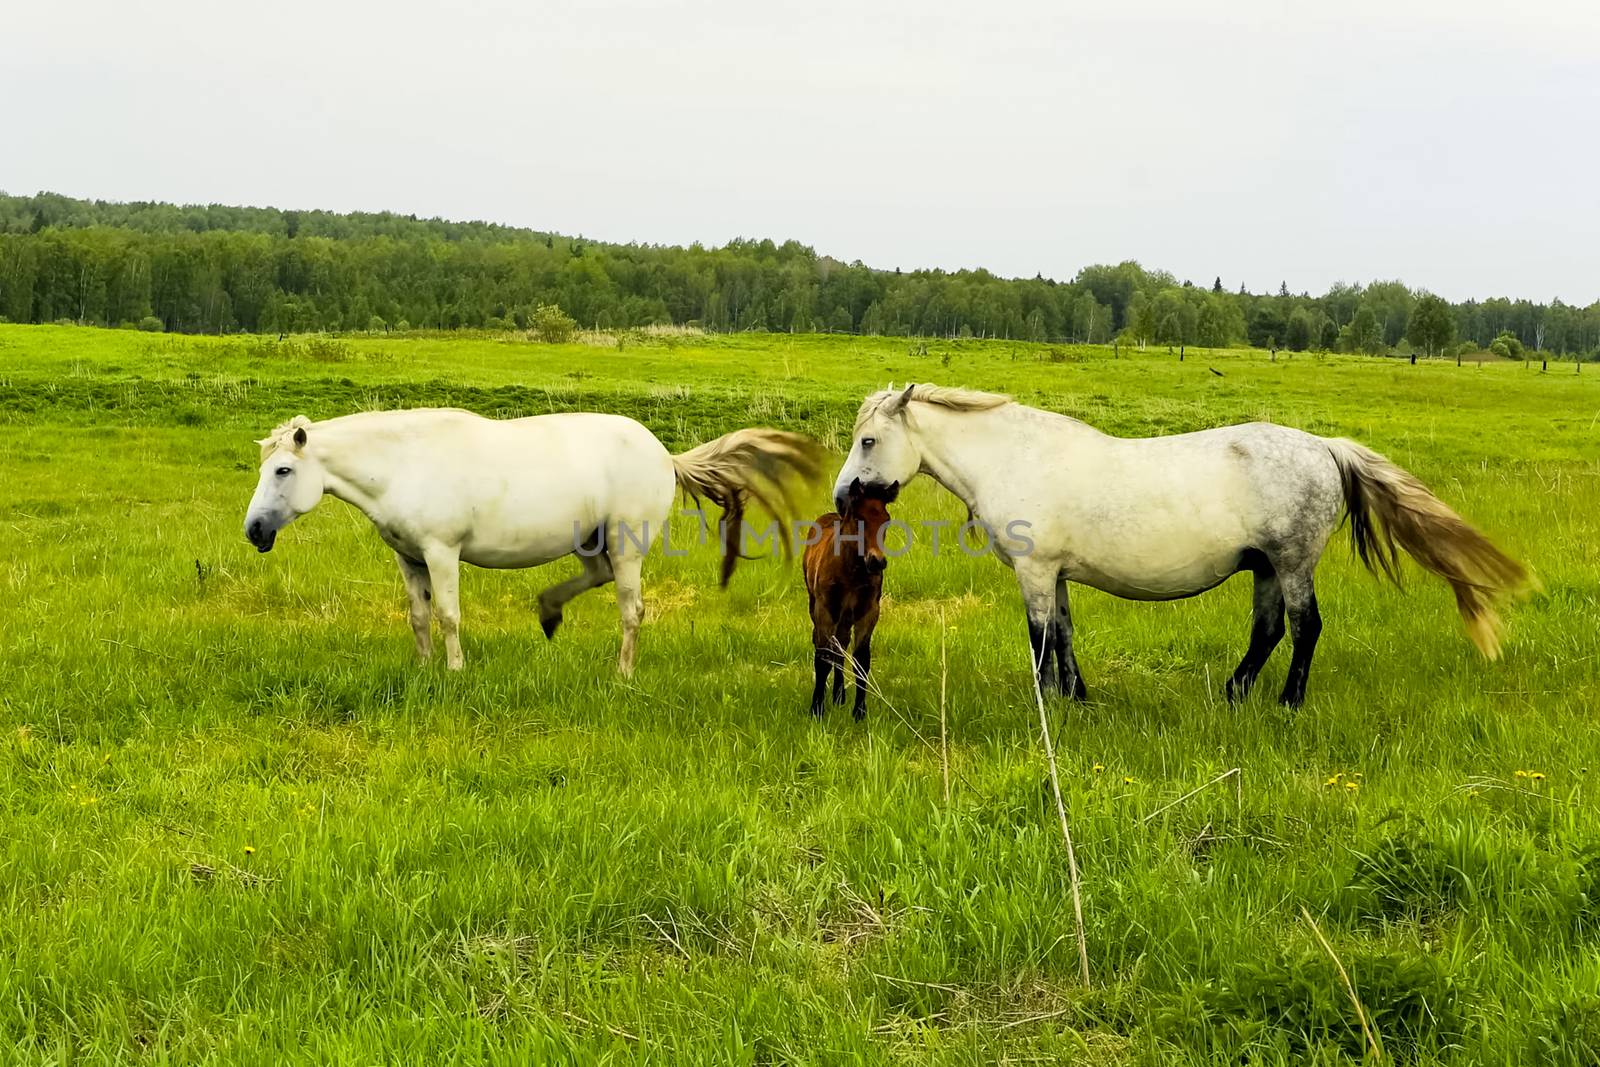 The herd of horses is grazing in a forest clearing. A pasture of by nyrok